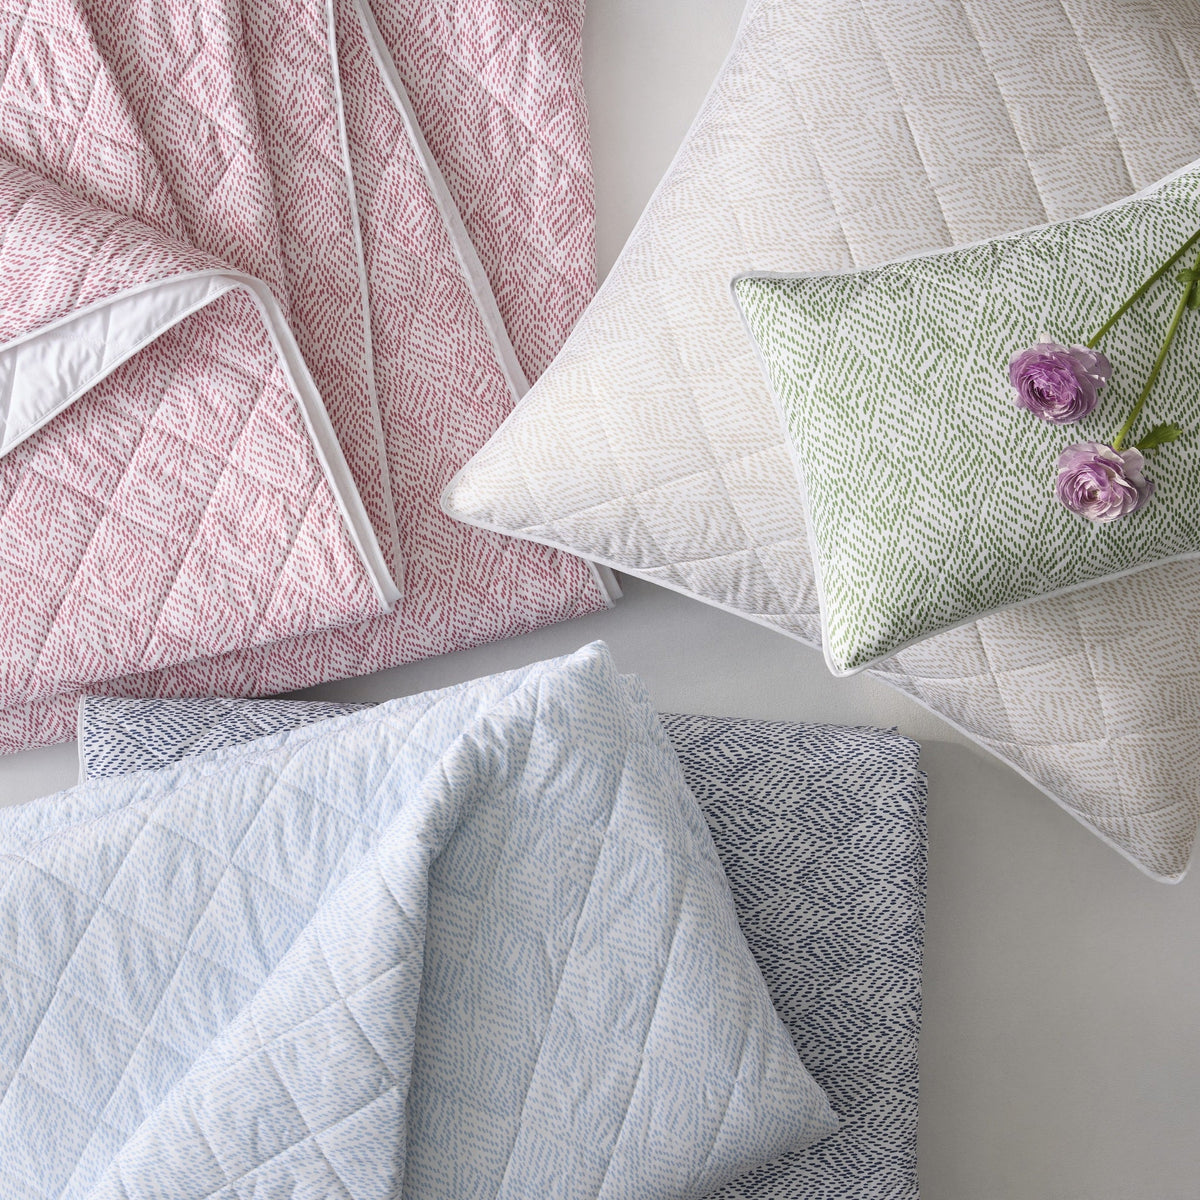 Top View of Matouk Duma Diamond Quilted Bedding in Different Colors